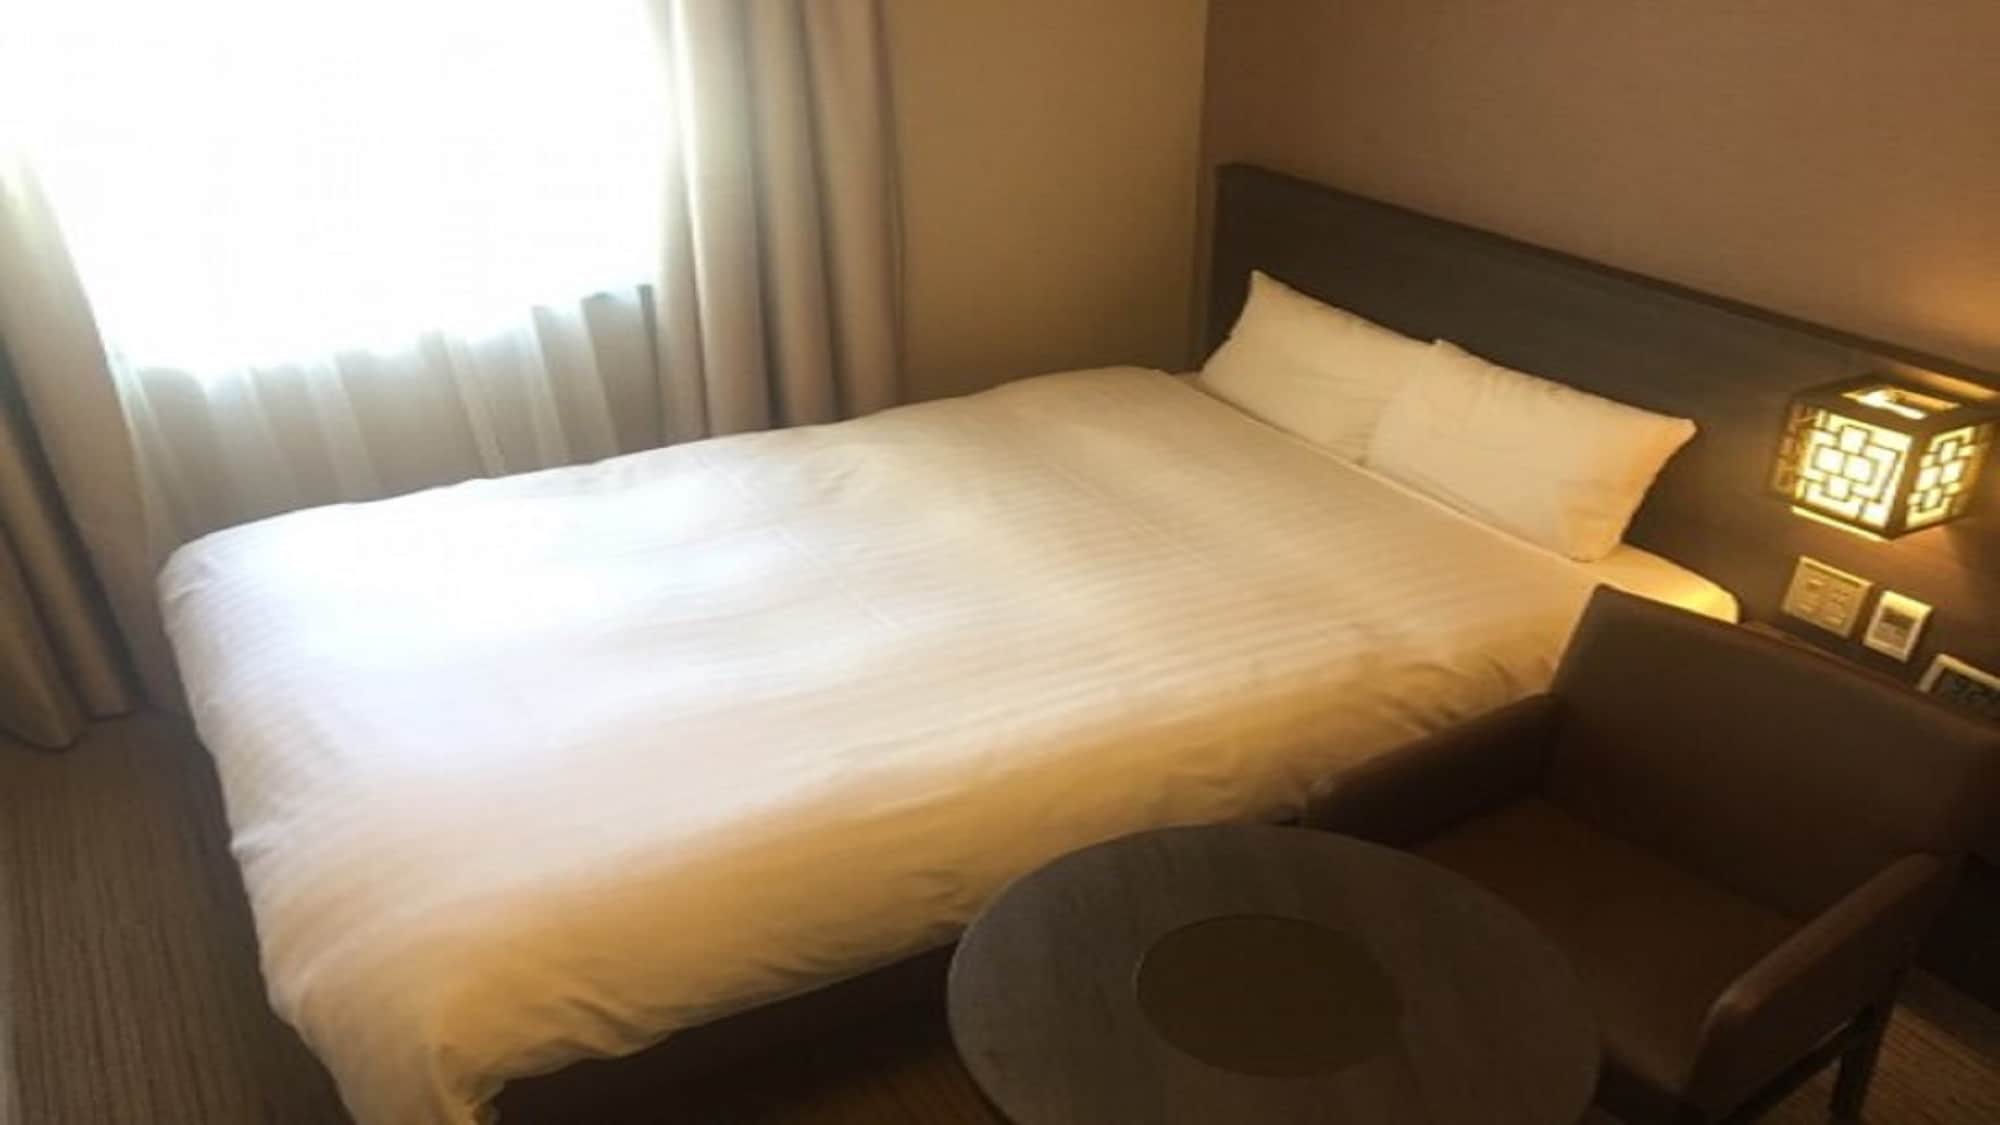 ■ Double room 14.0㎡ Bed size: 140cm & times; 195cm